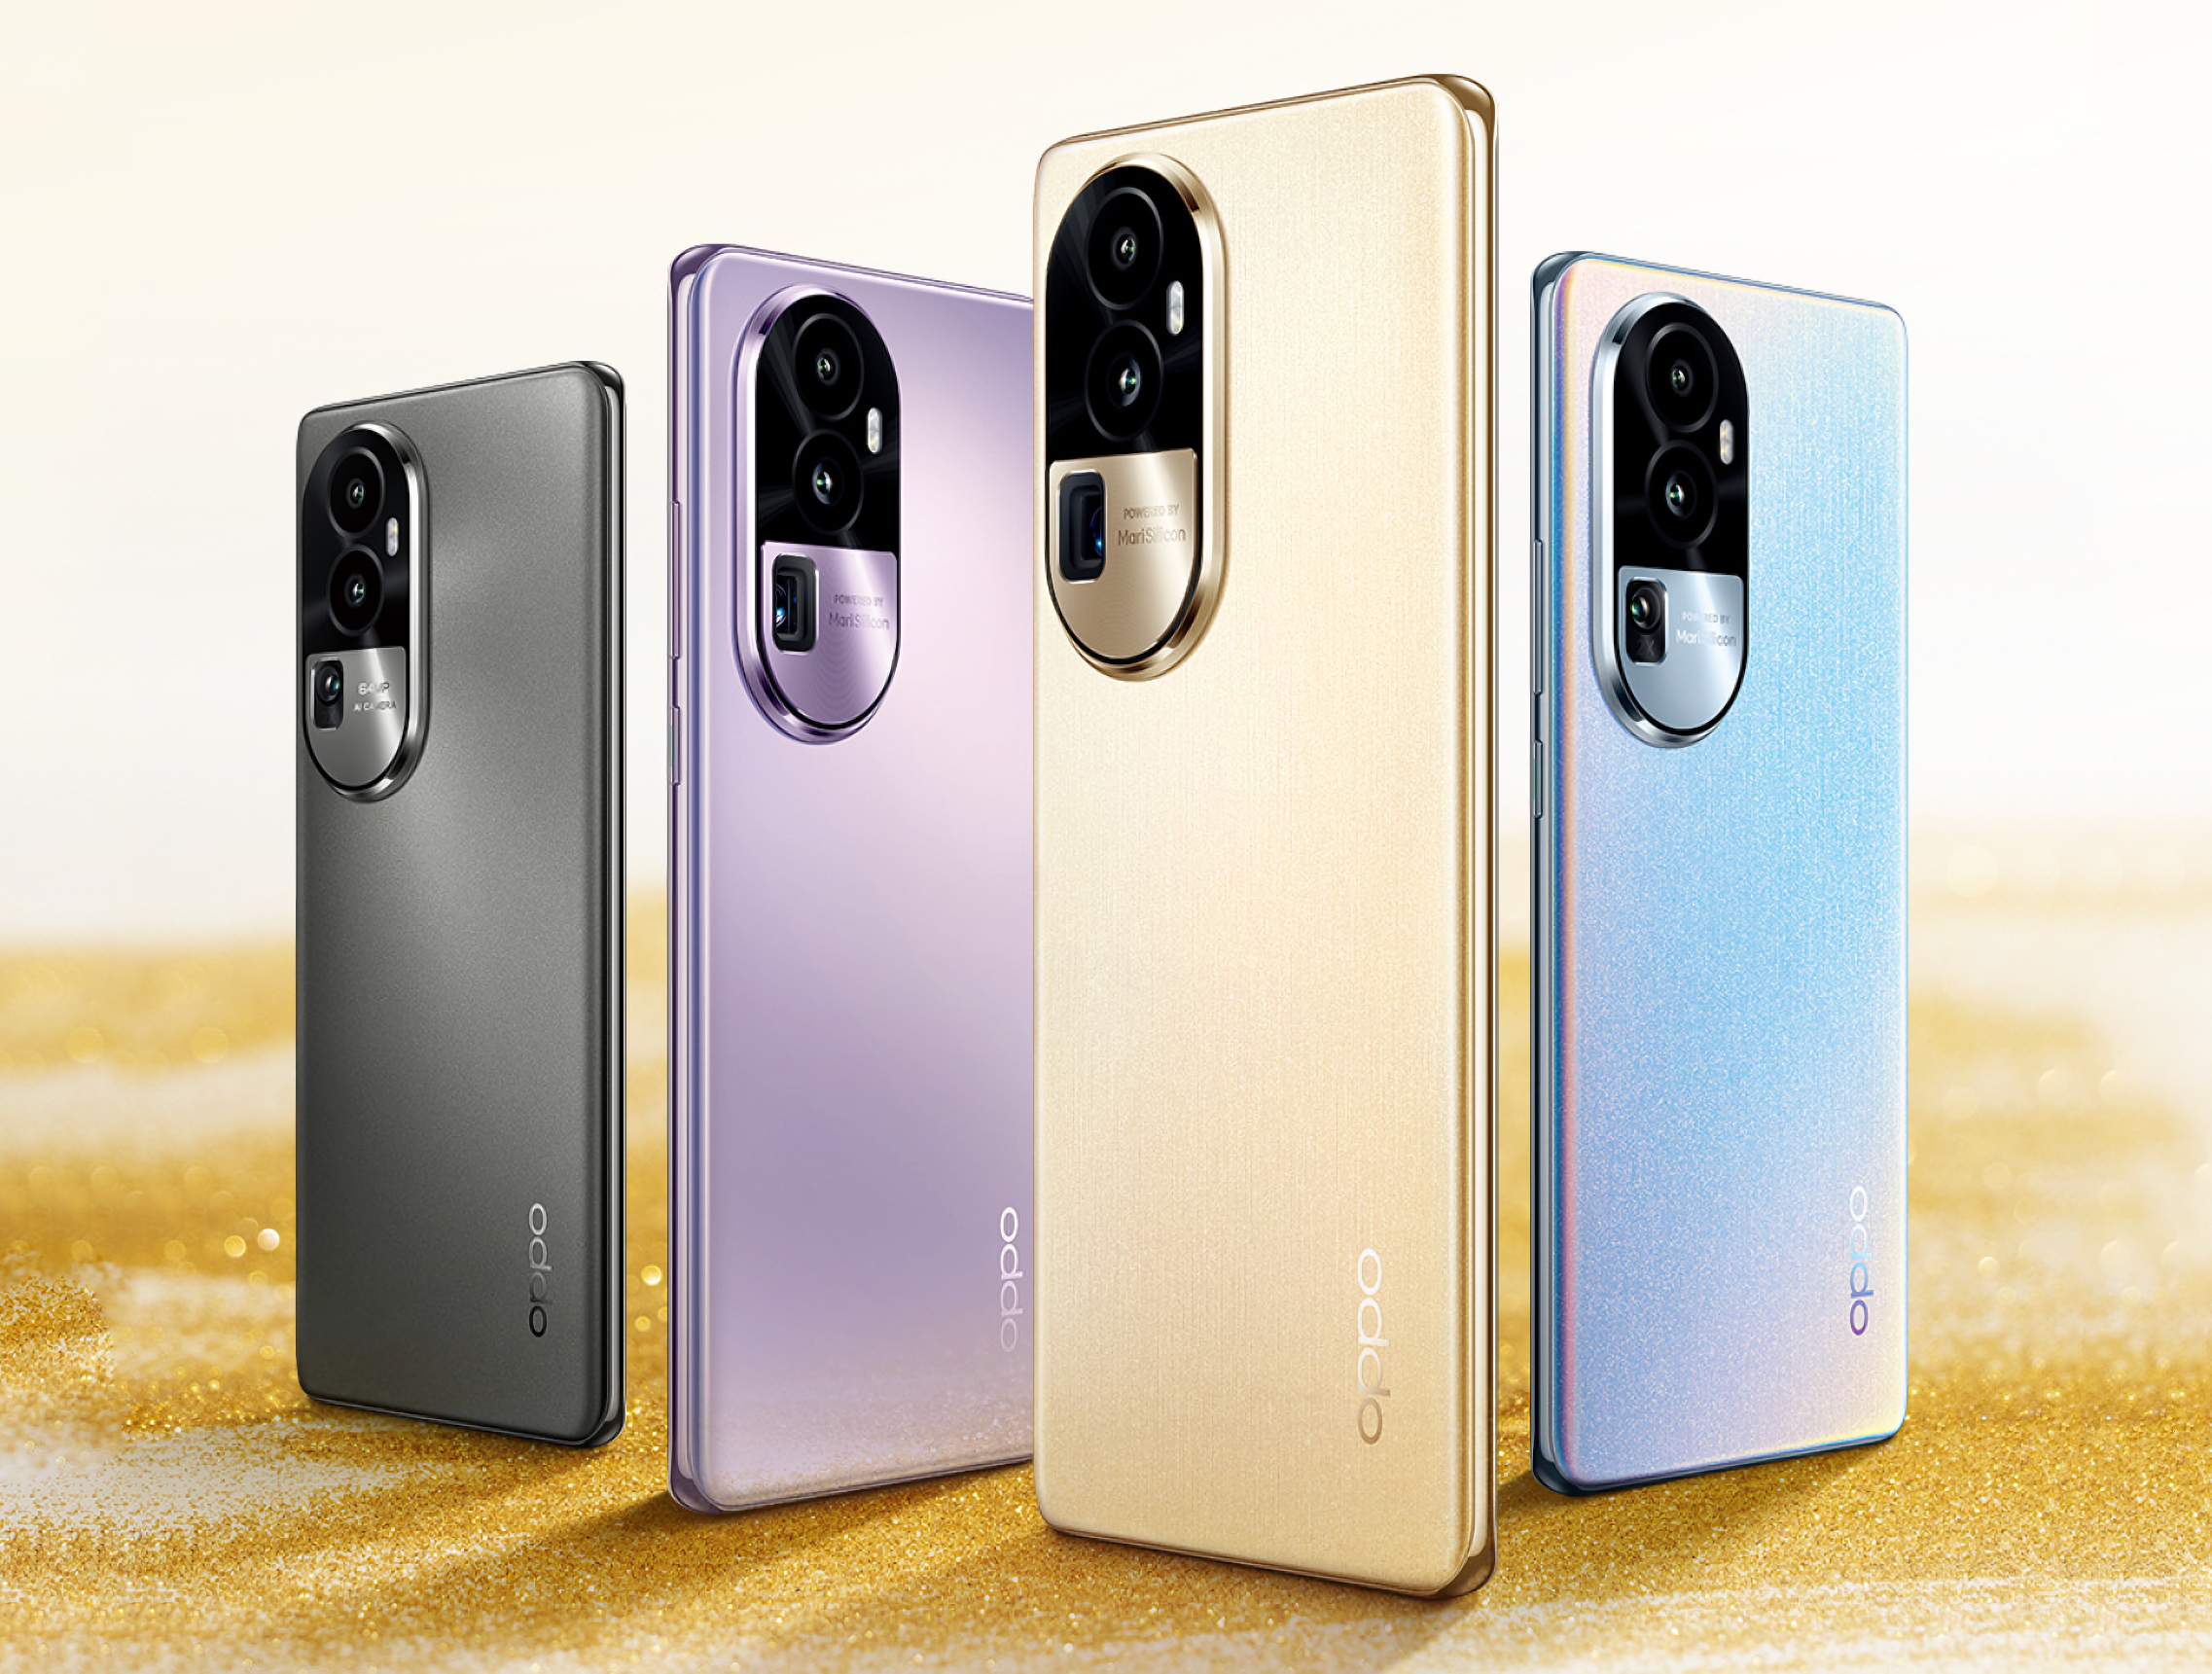 OPPO unveiled Reno 10 Pro and Reno 10 Pro+: smartphones with ProXDR OLED screens, Dimensity 8200/Snapdragon 8+ Gen 1 chips and 100W charging